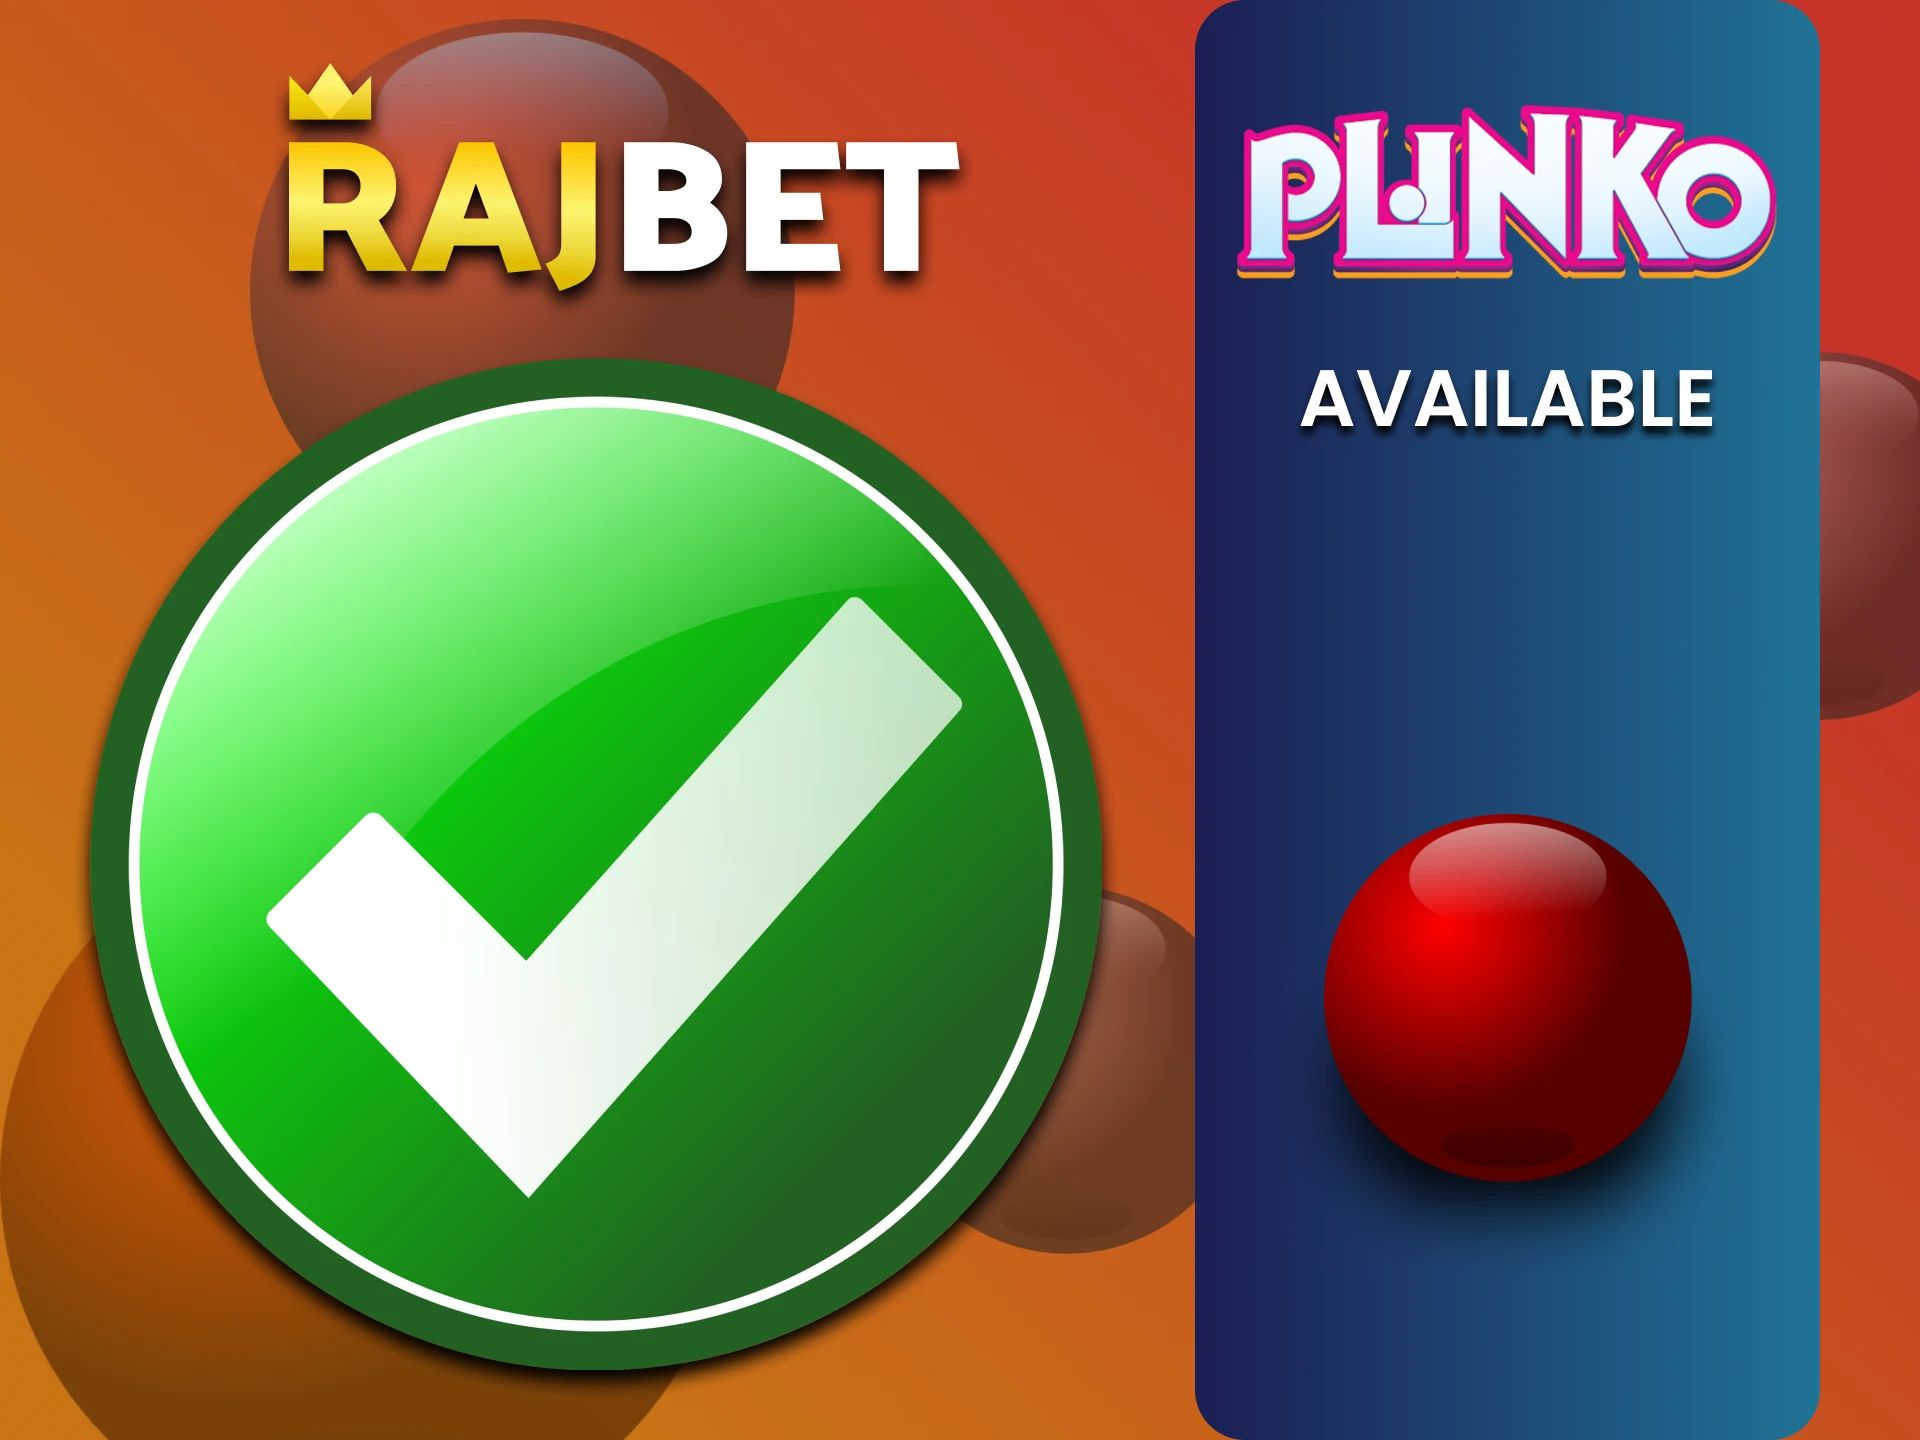 Find out which providers offer Plinko on Rajbet.